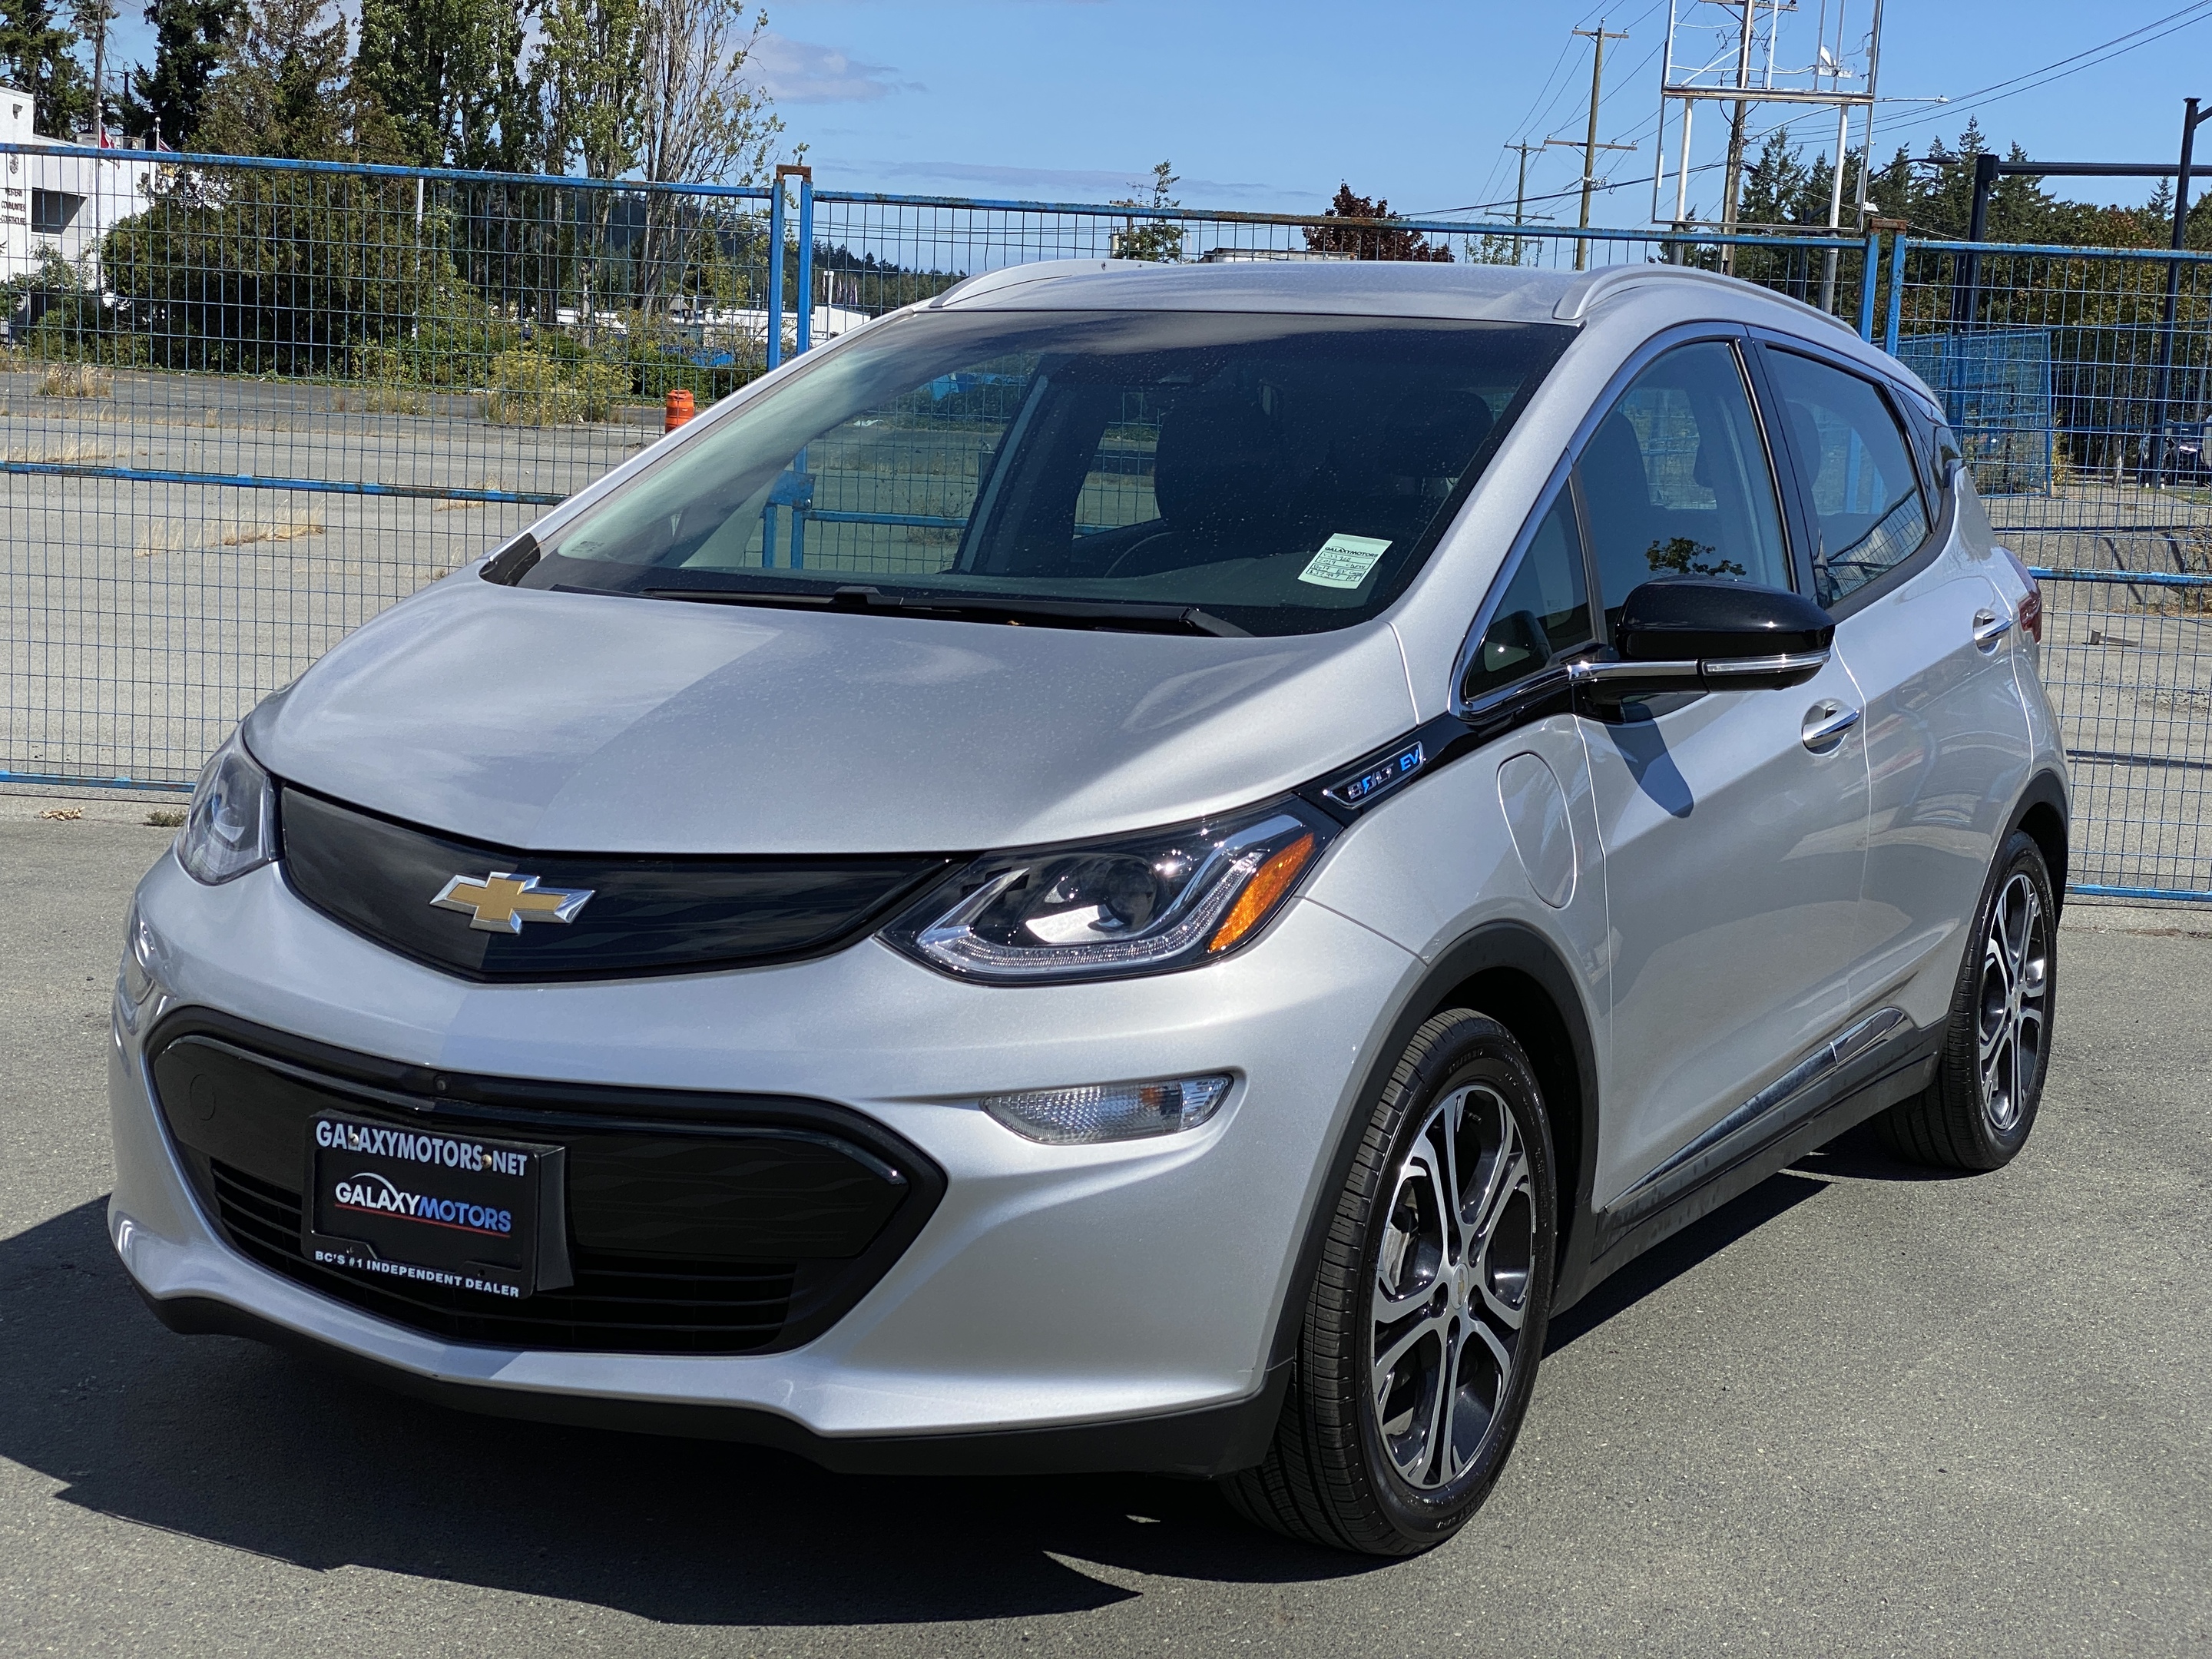 2019 Chevrolet Bolt EV Auto-dimming Rear-View, Apple CarPlay/Android Auto